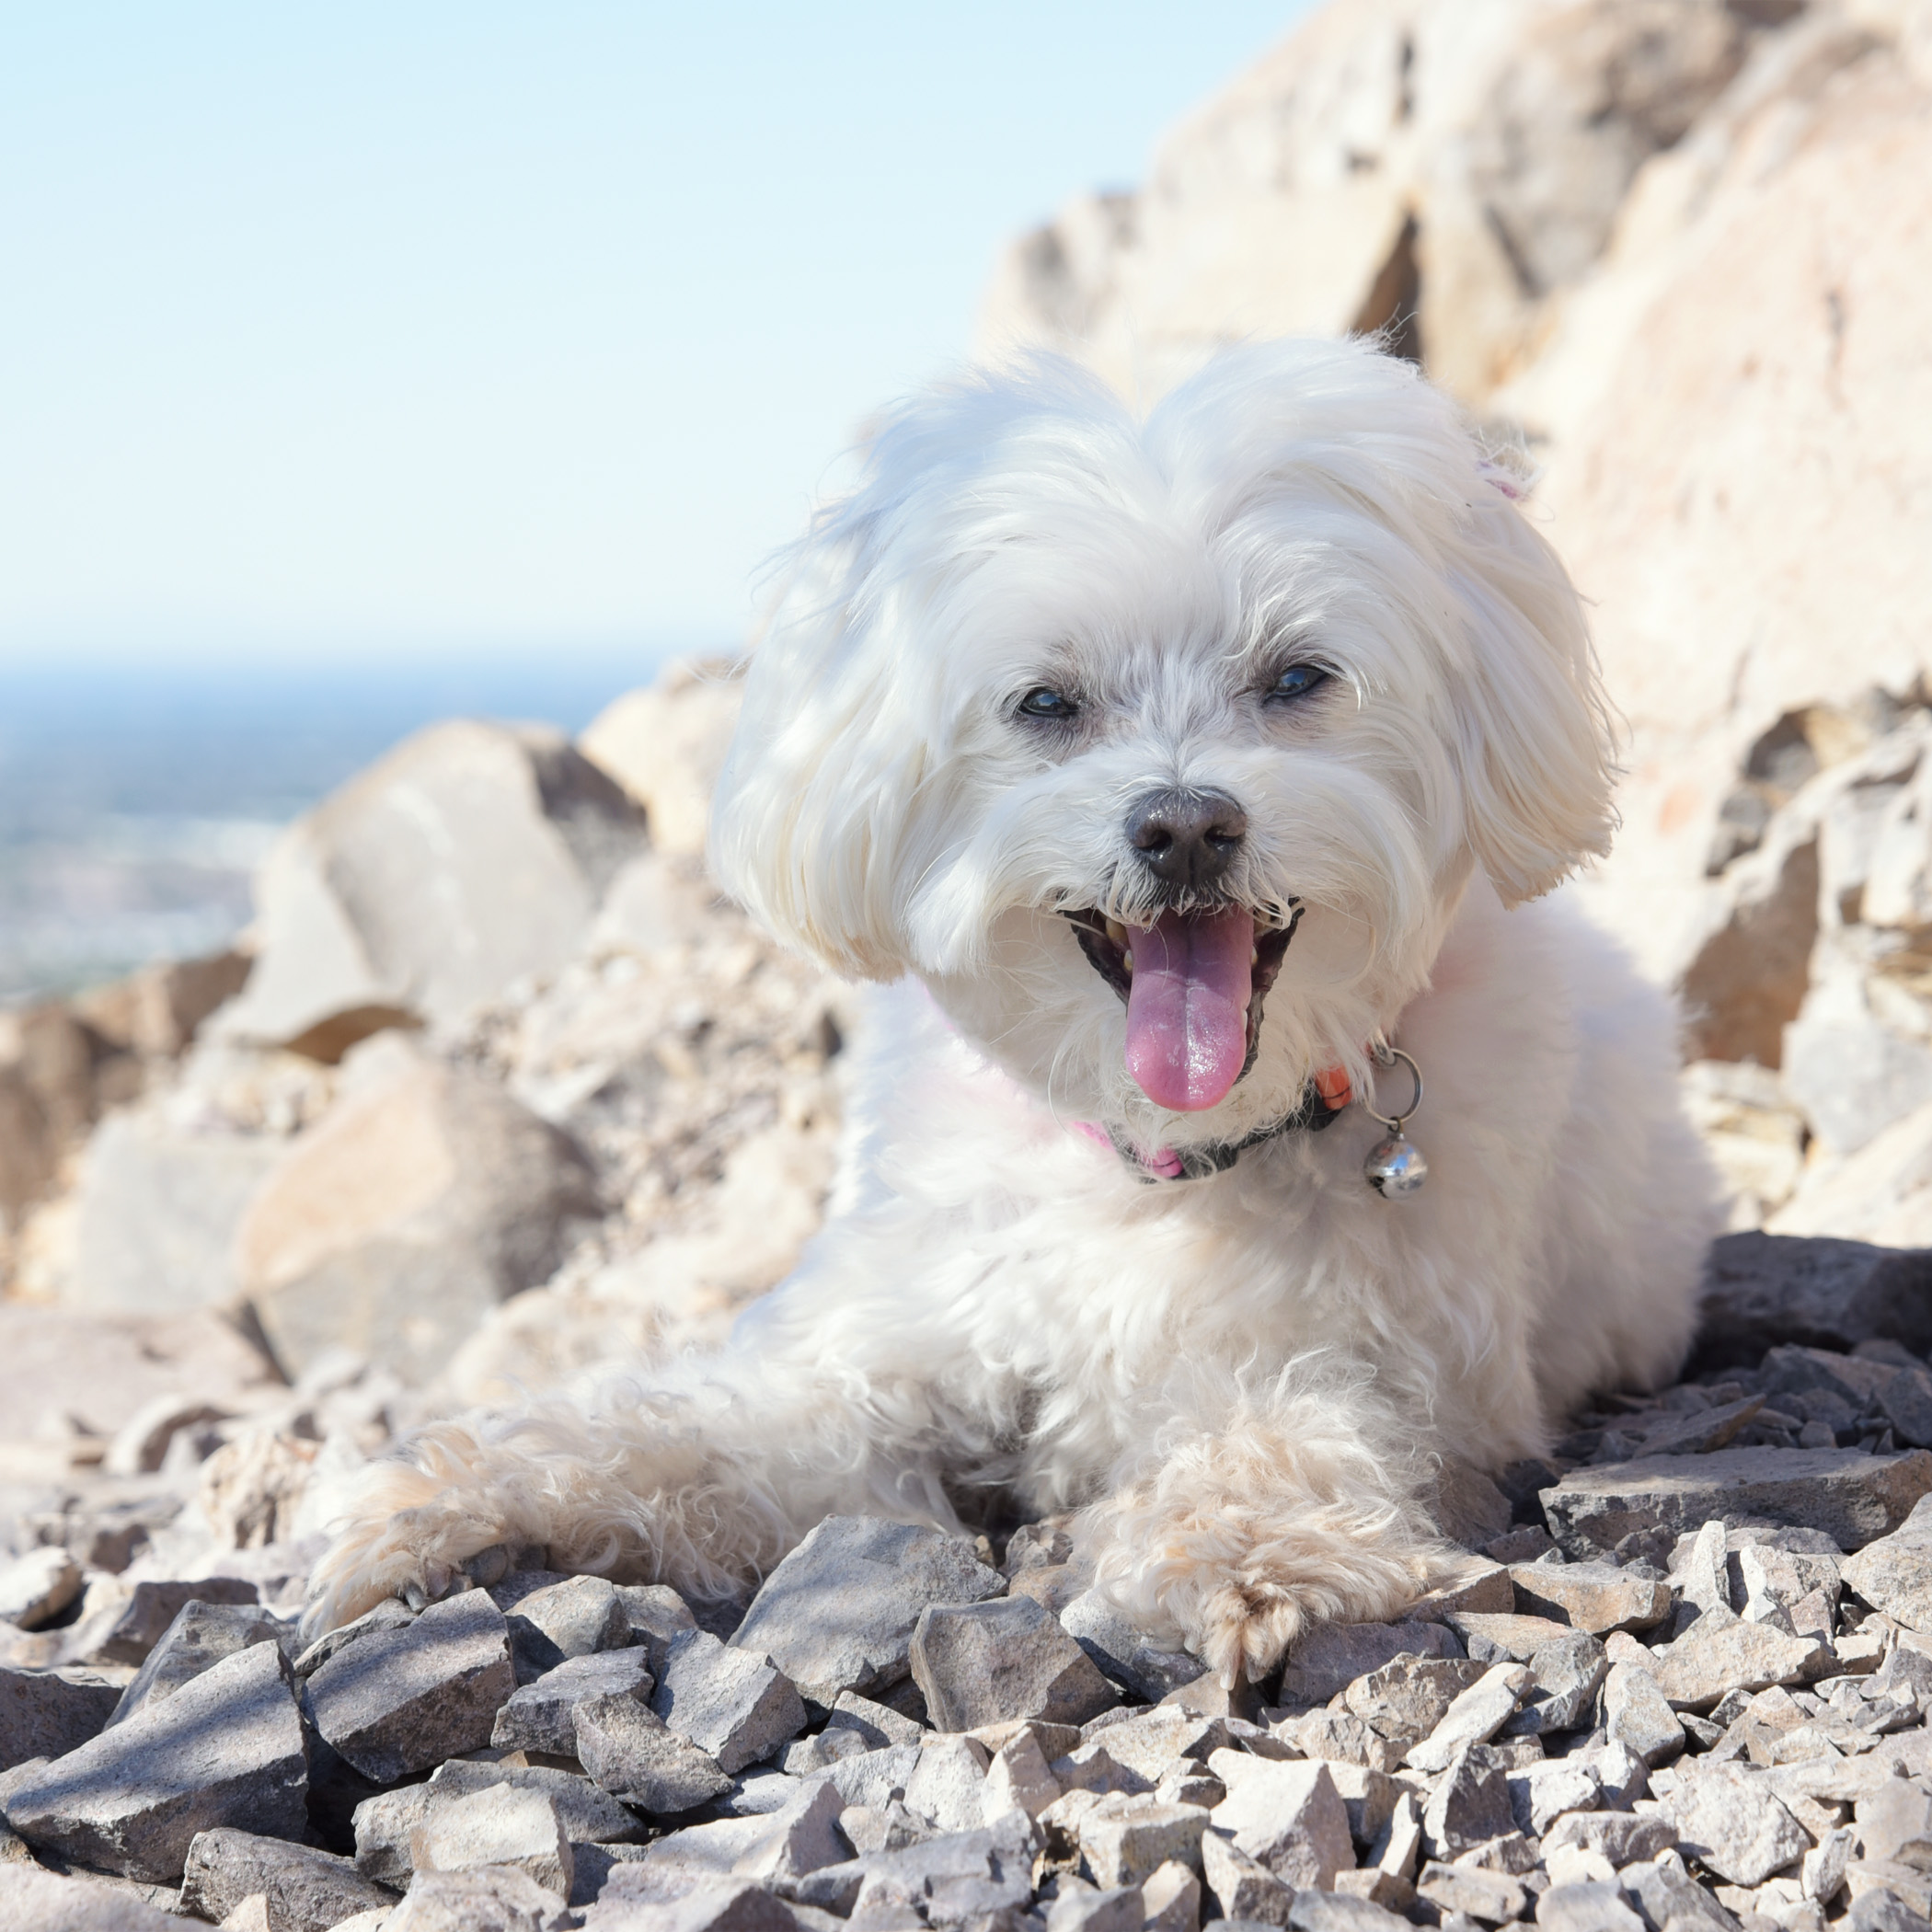  Leave it to Pebbles to find the only teeny tiny spot of shade at the top of the mountain! And, she looks so proud of herself, as well! 